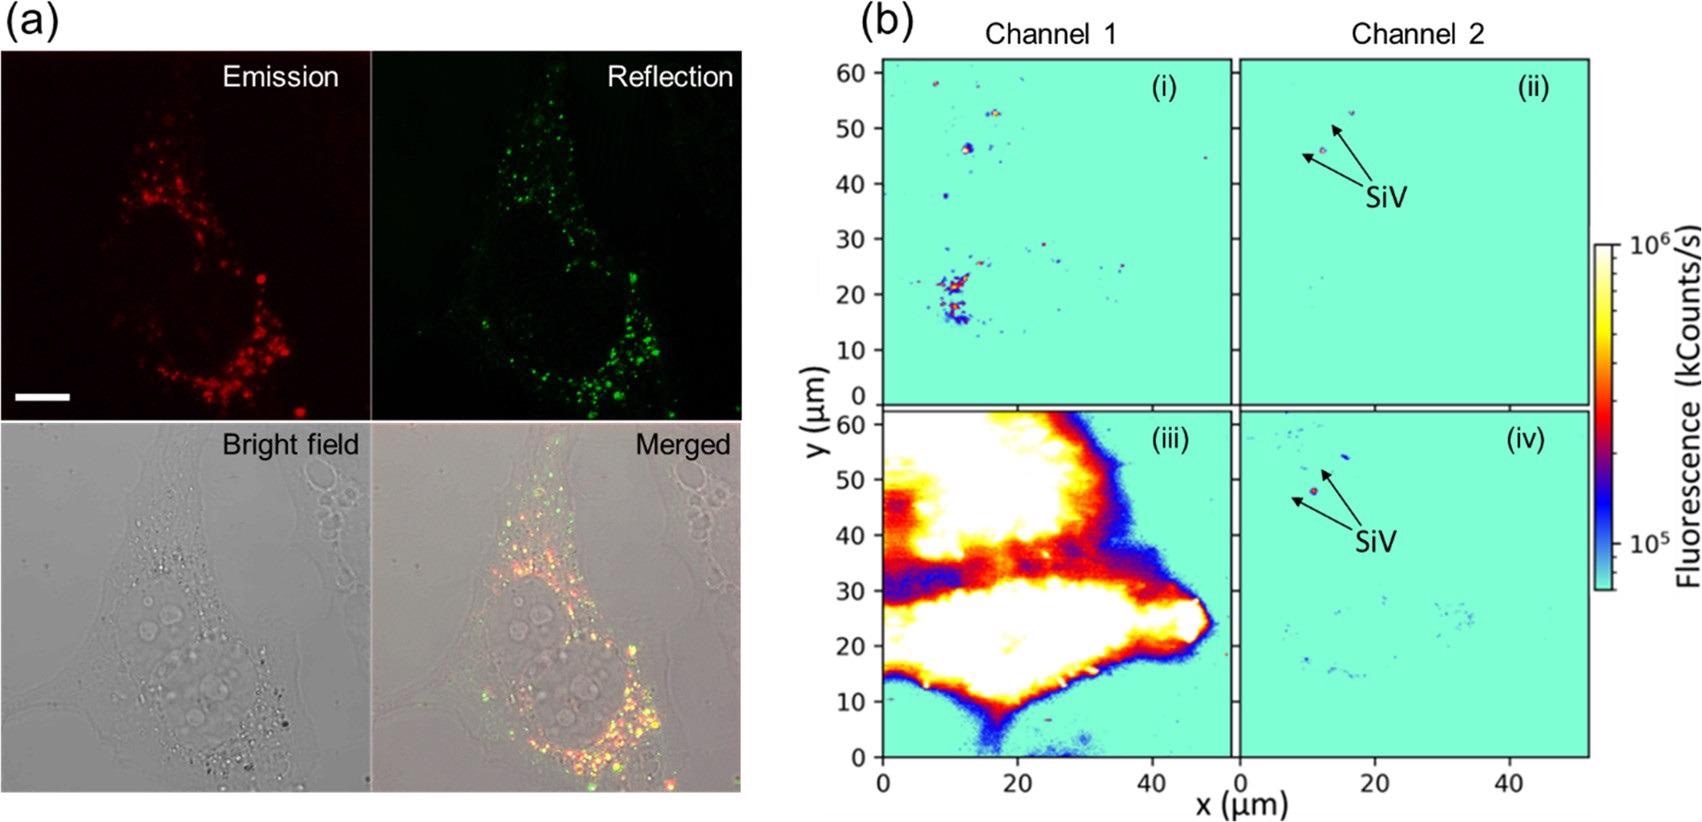 NDSiV-polymer for dual-color cell imaging. (a) Confocal microscopy cell images showing efficient cell uptake. Emission and reflection channels demonstrated very good colocolization (?ex = 561 nm, ?em = 700–758 nm, ?re = 556–566 nm, scale bar = 10 µm). (b) Fluorescence cell images obtained by a customized confocal microscope (?ex = 532 nm) with two detection channels (1 – ?em = 575 nm and longer, 2 – ?em = 720–760 nm).